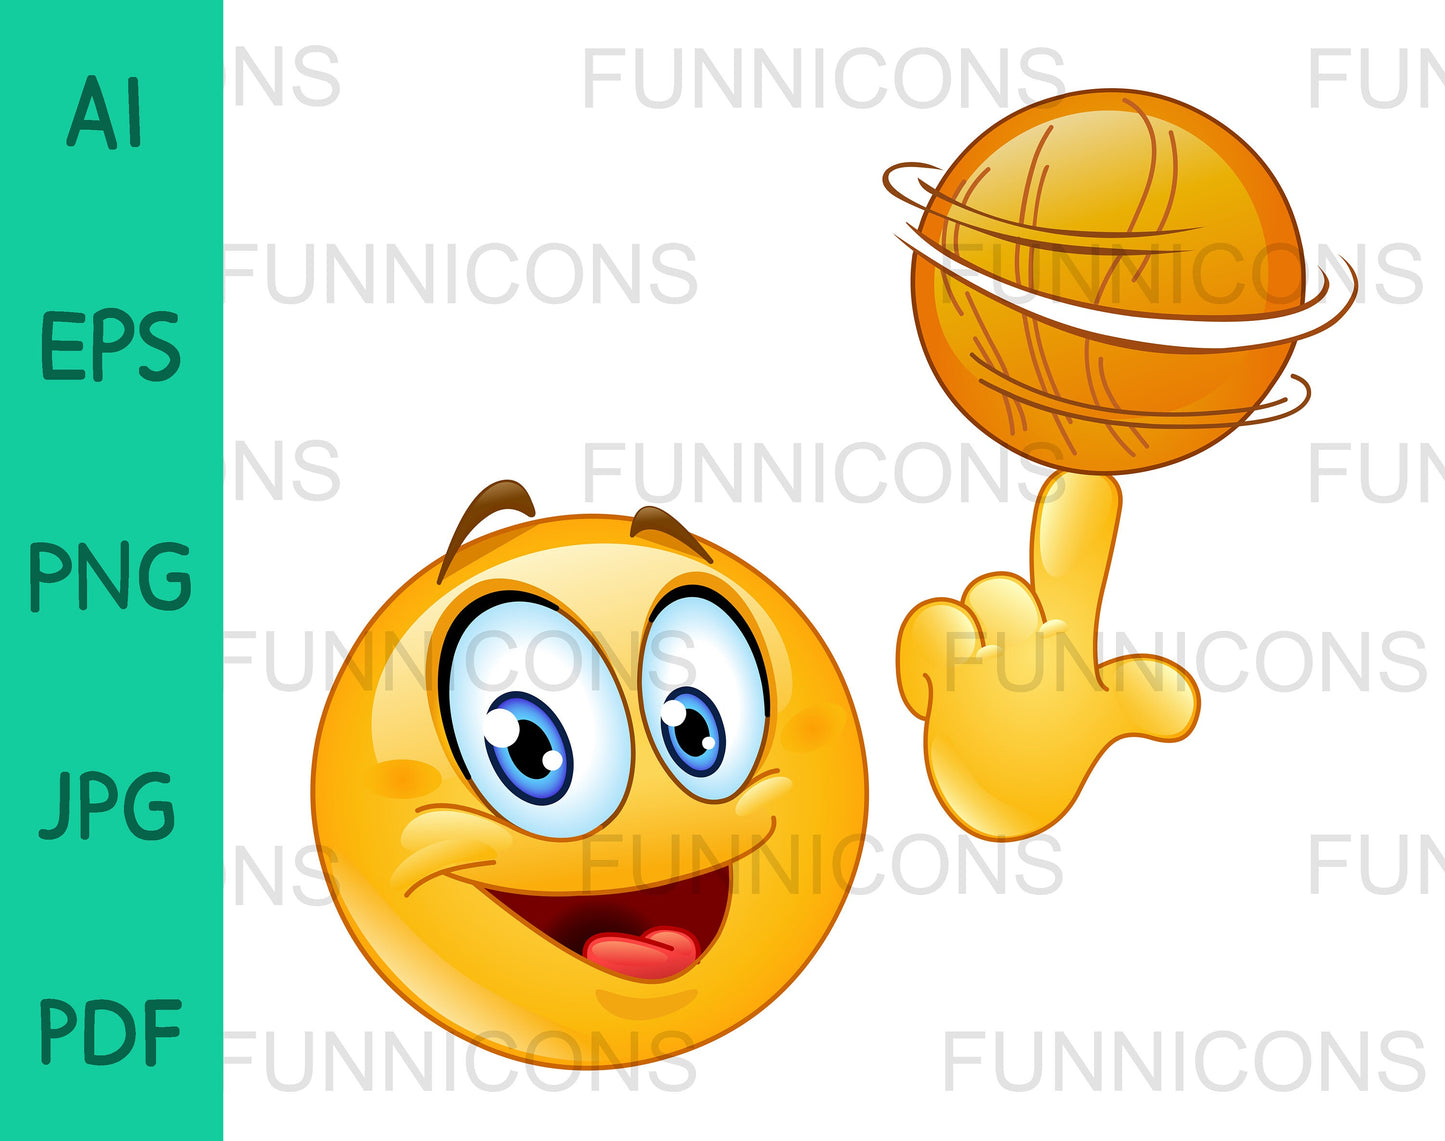 Emoji Spinning a Basketball Ball on his Finger